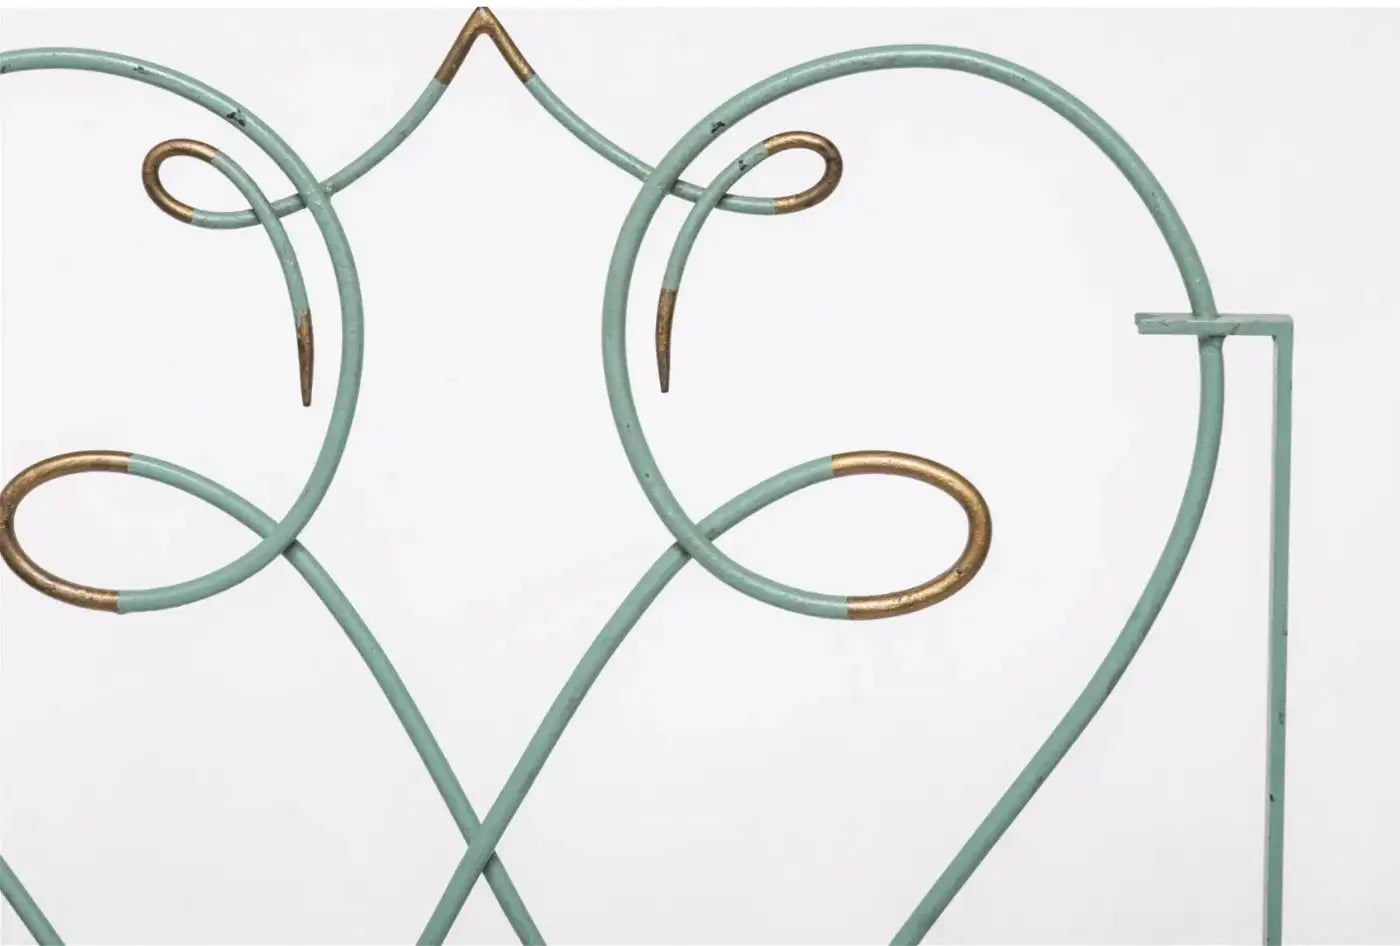 French Art Deco Wrought Iron Fire Screens attributed to Gilbert Poillerat